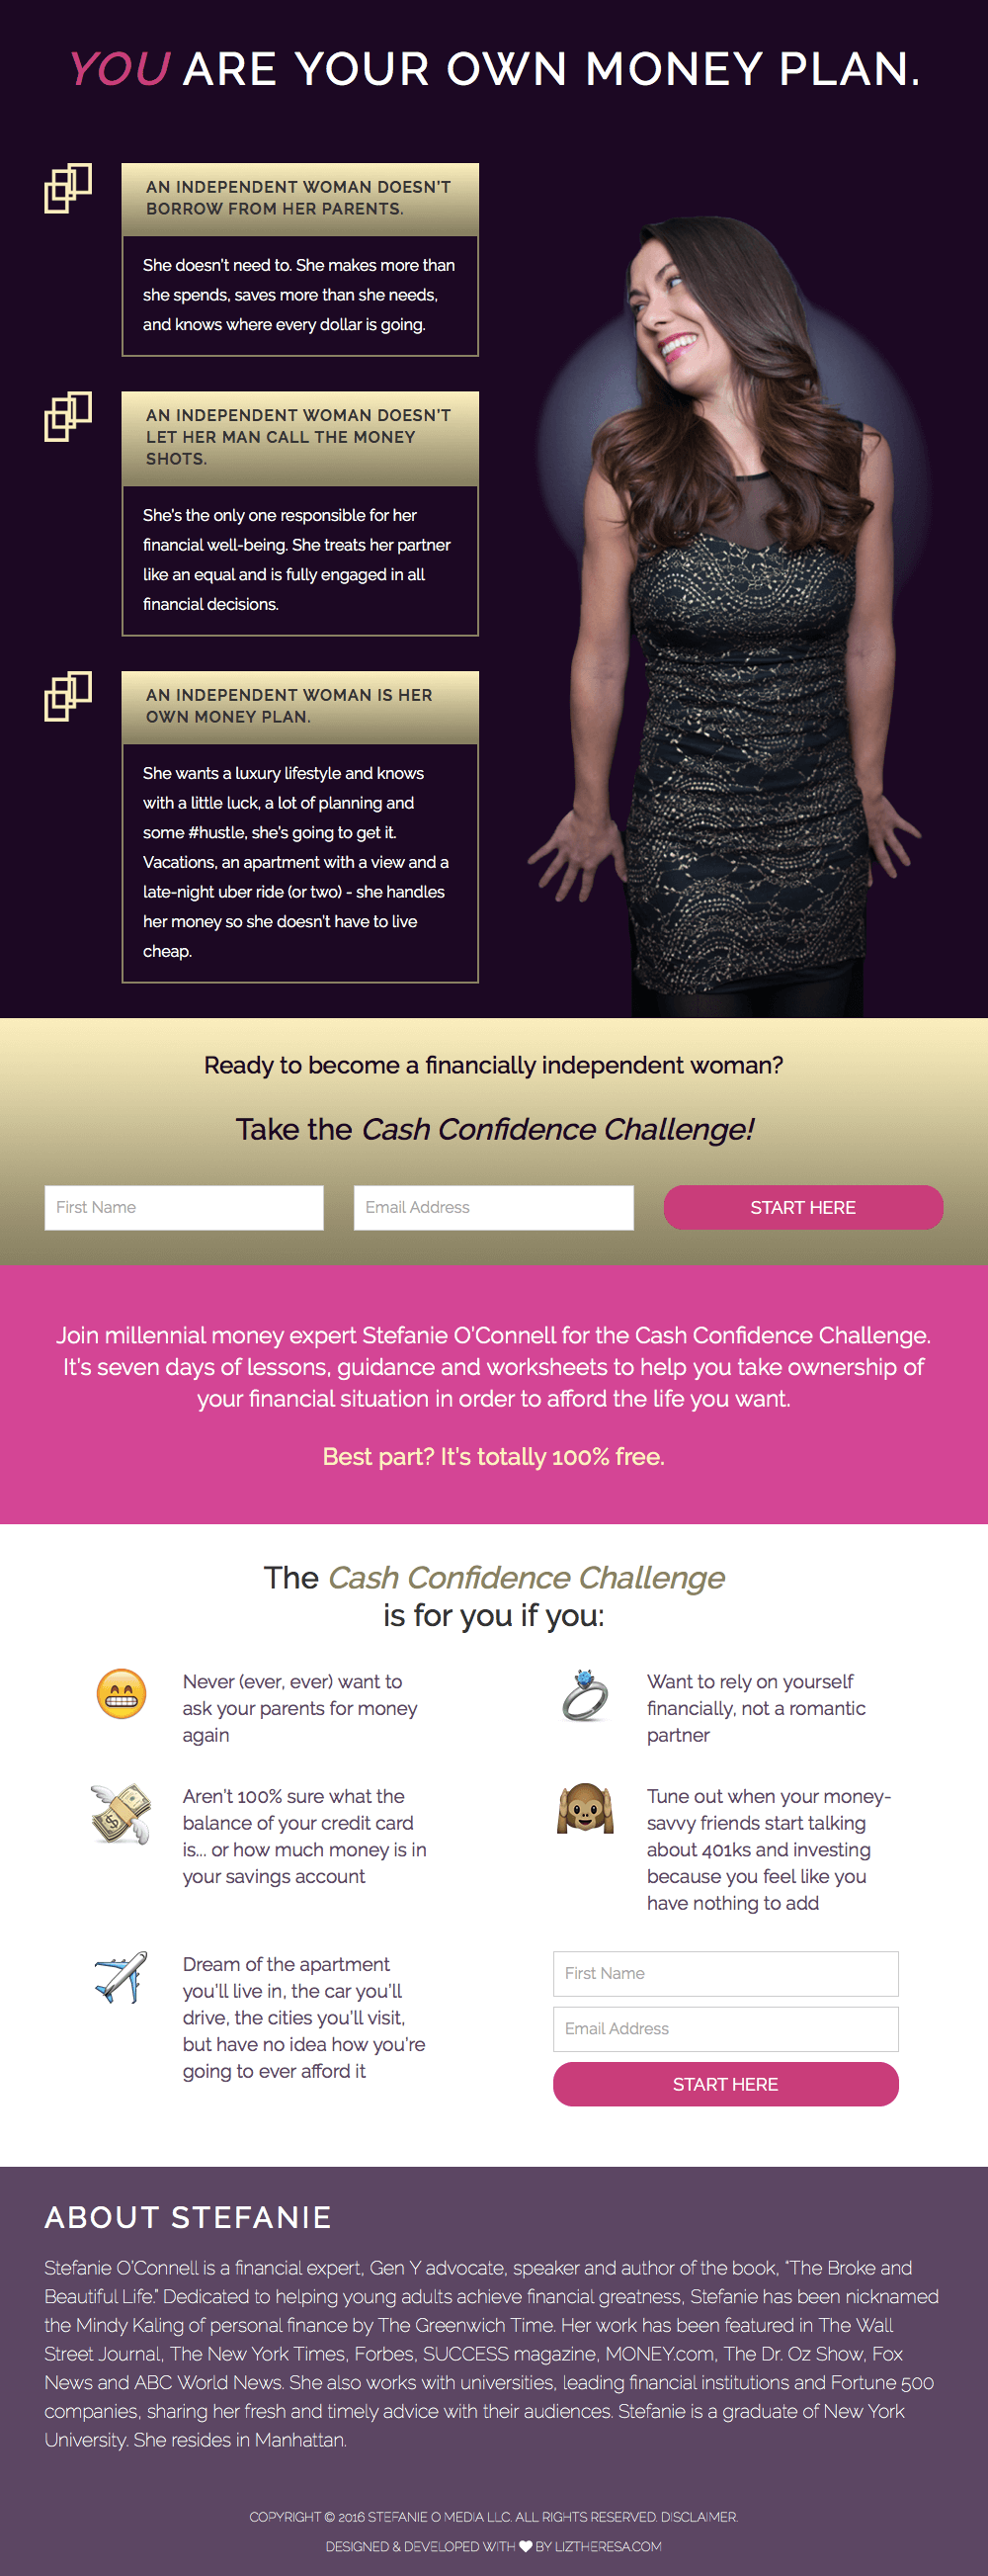 7 Day Cash Confidence